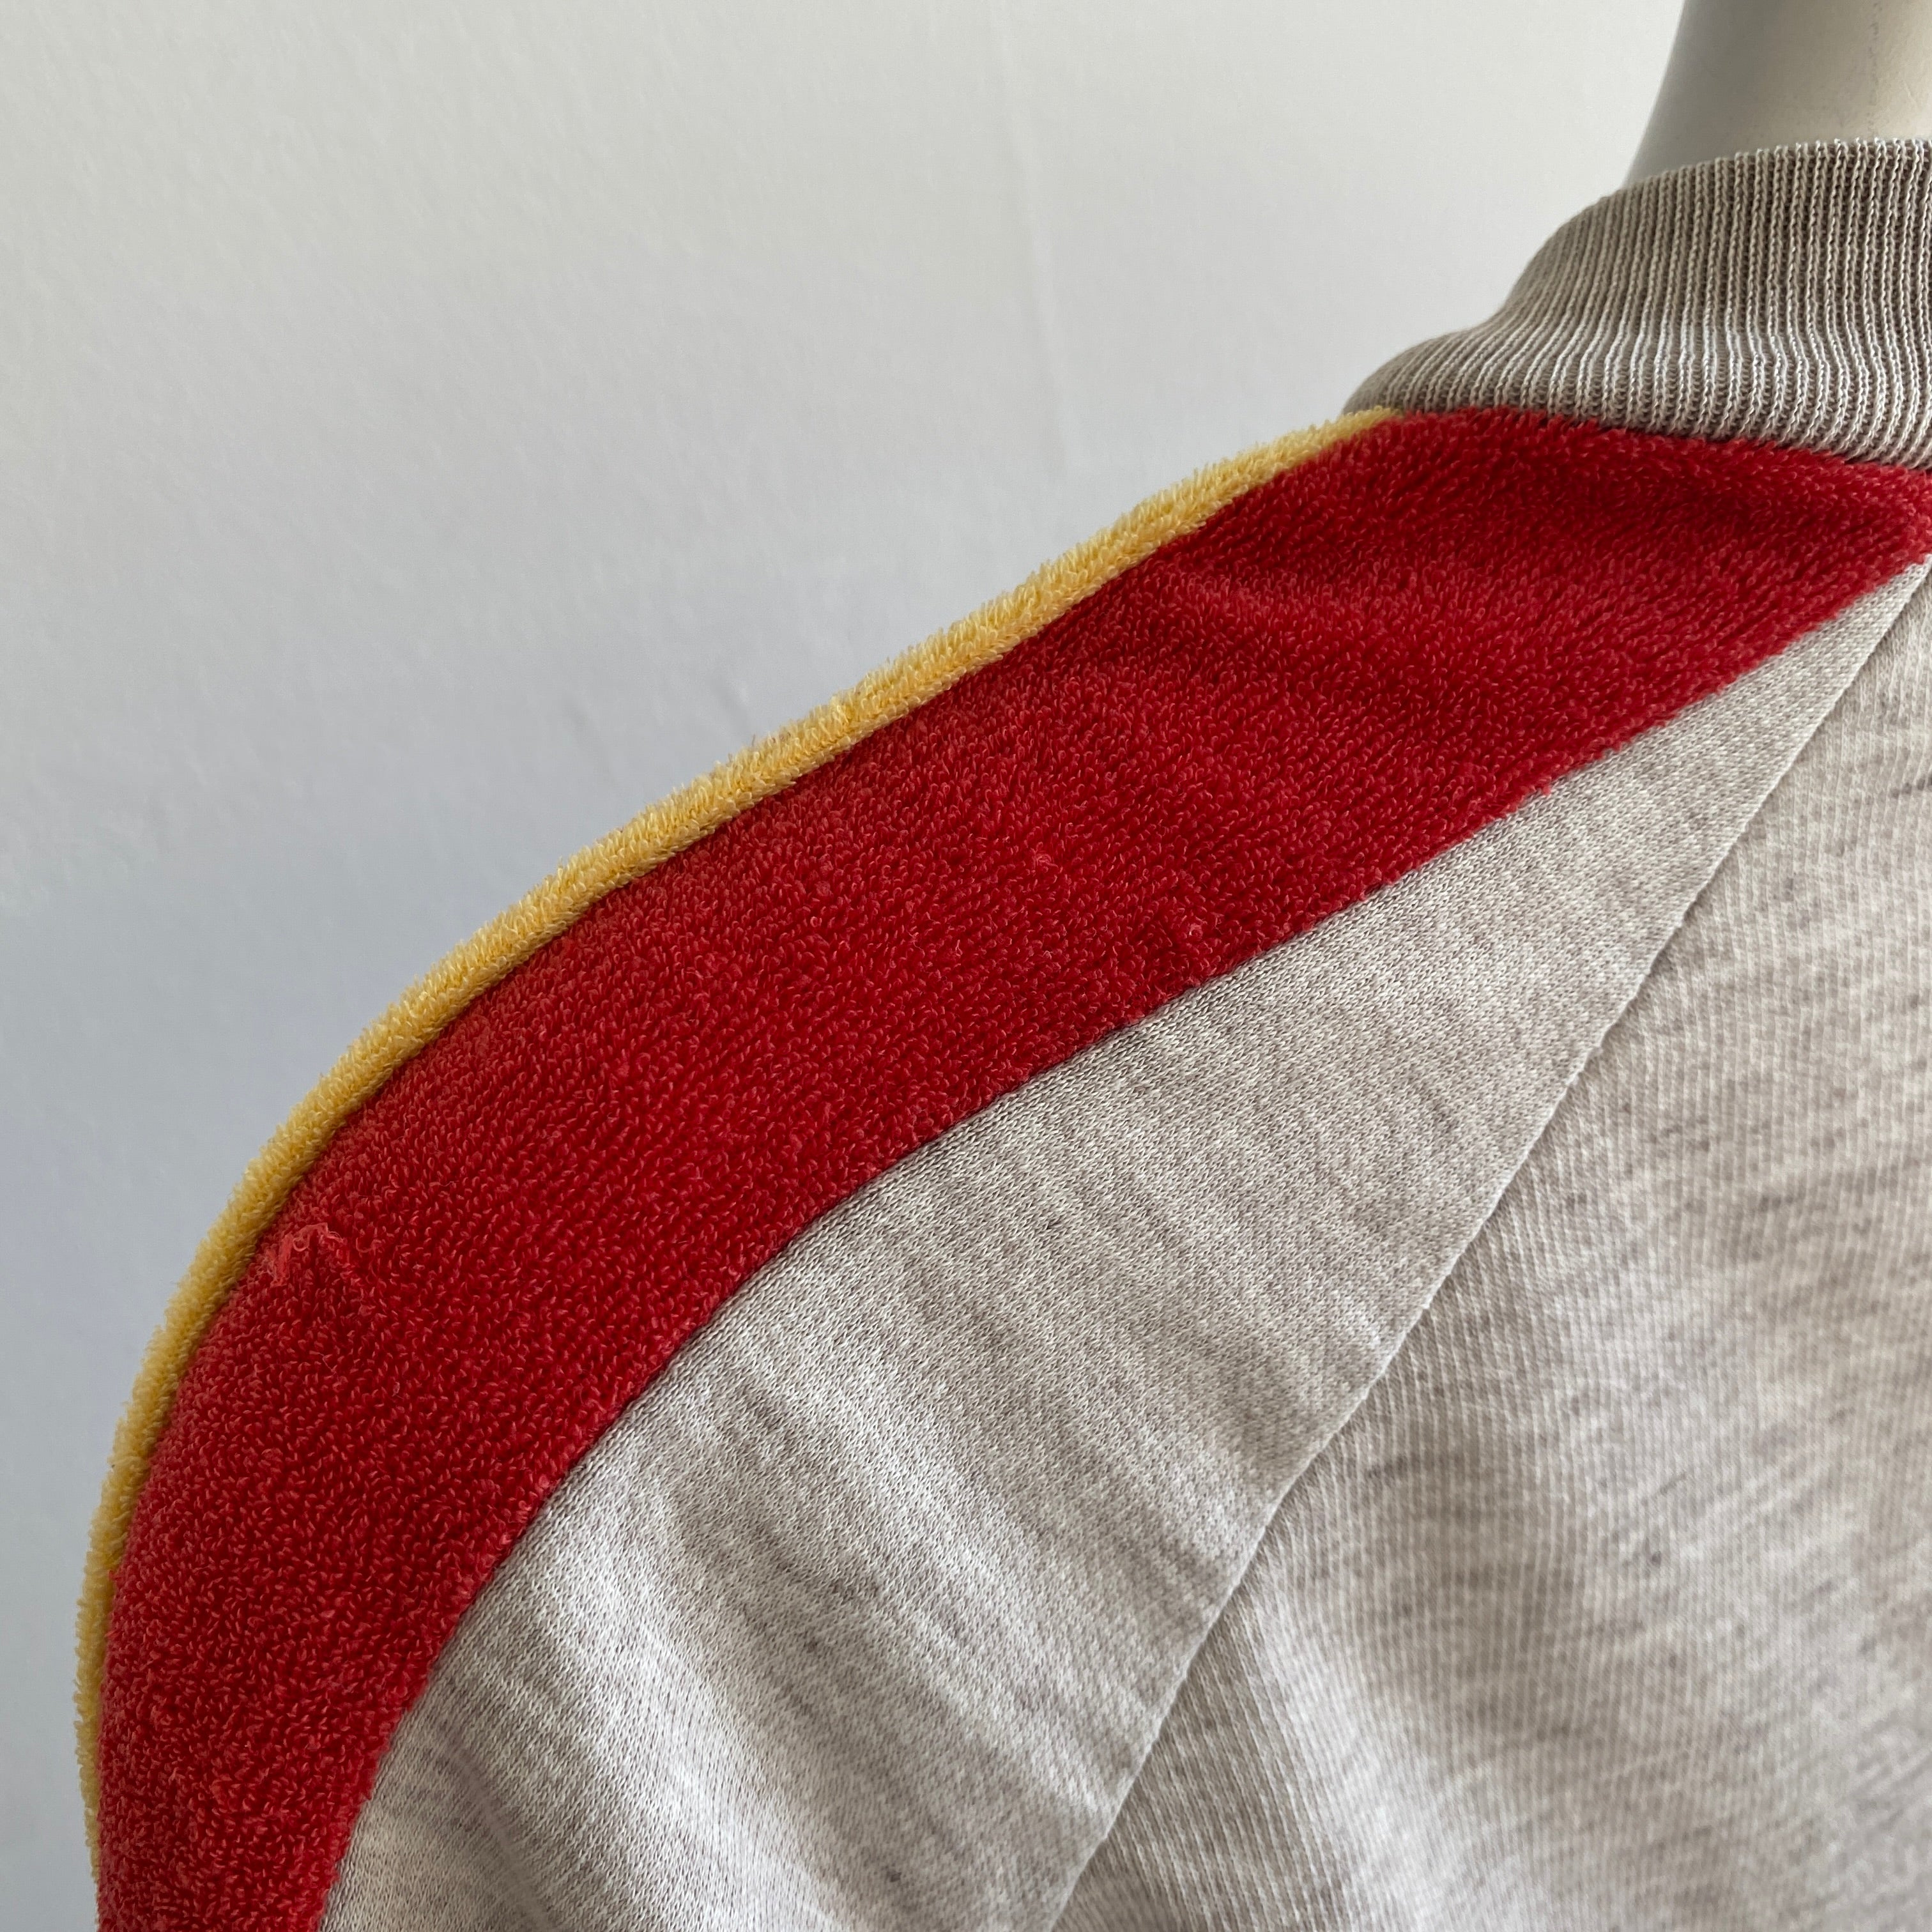 1970s Paper Thin V-Neck Sweatshirt with a Velour Side Stripe, POCKETS and Stains